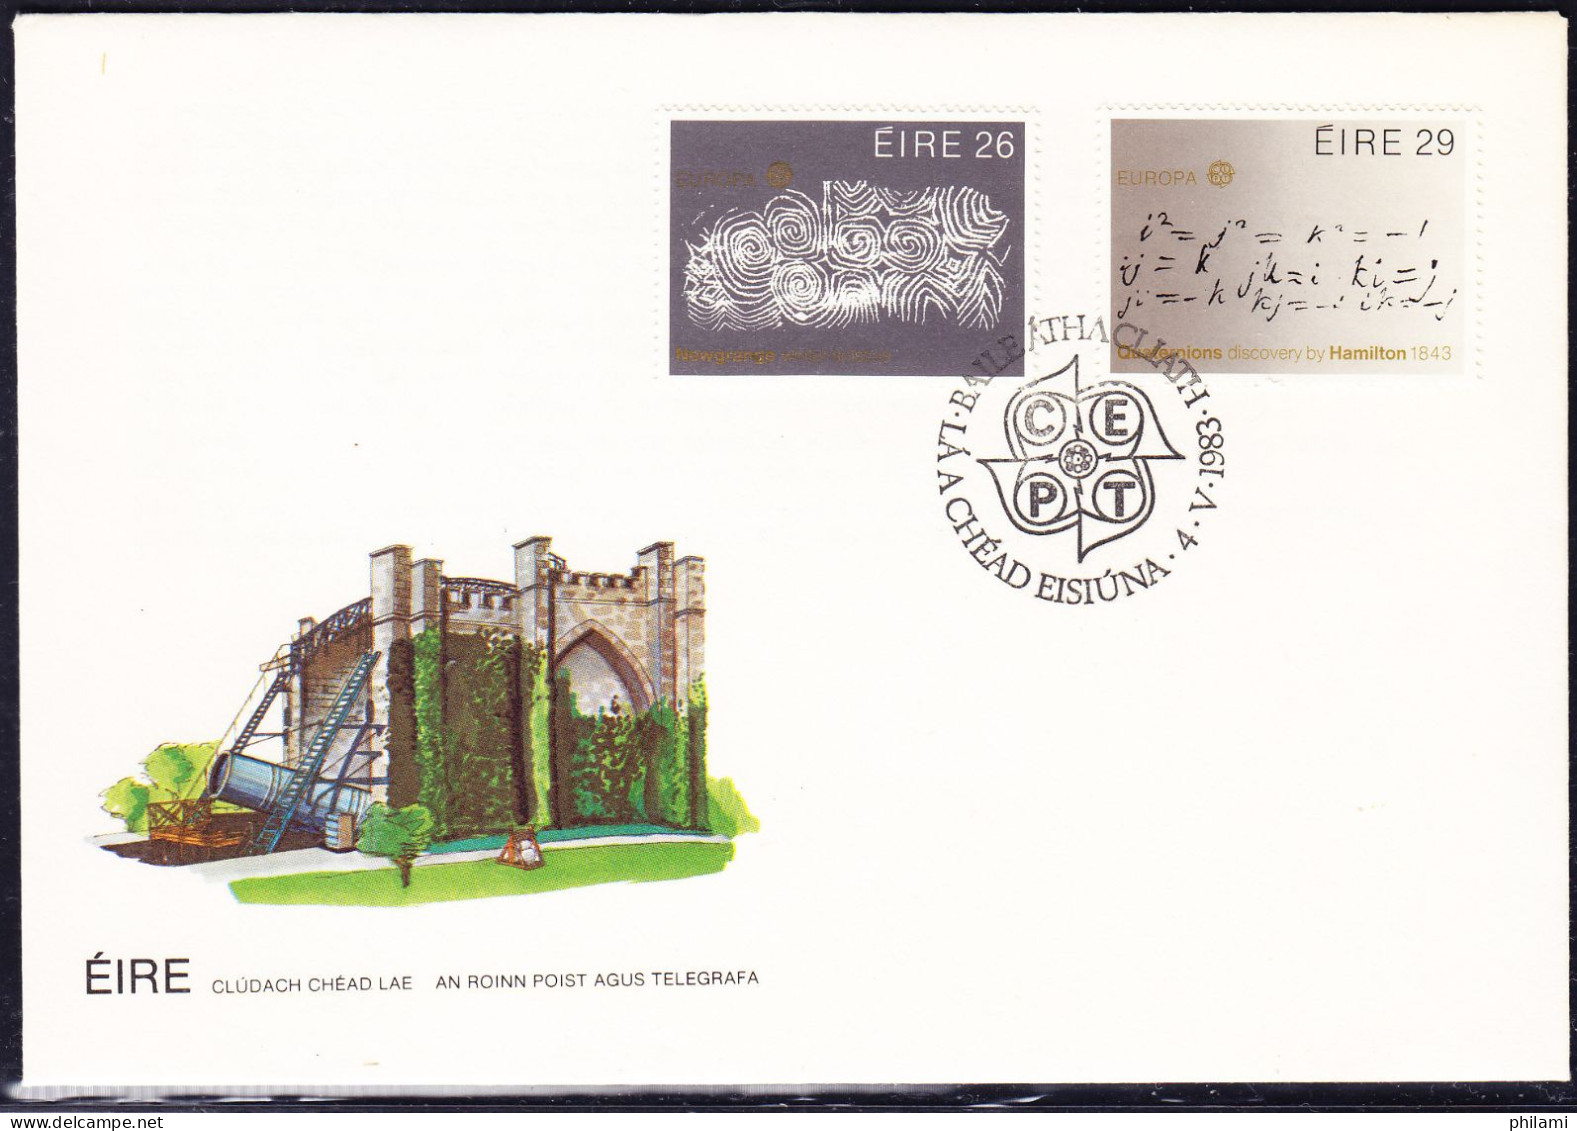 IRLANDE , YT 504/5, 1983 FDC, CEPT, EUROPA   (FDC65) - FDC